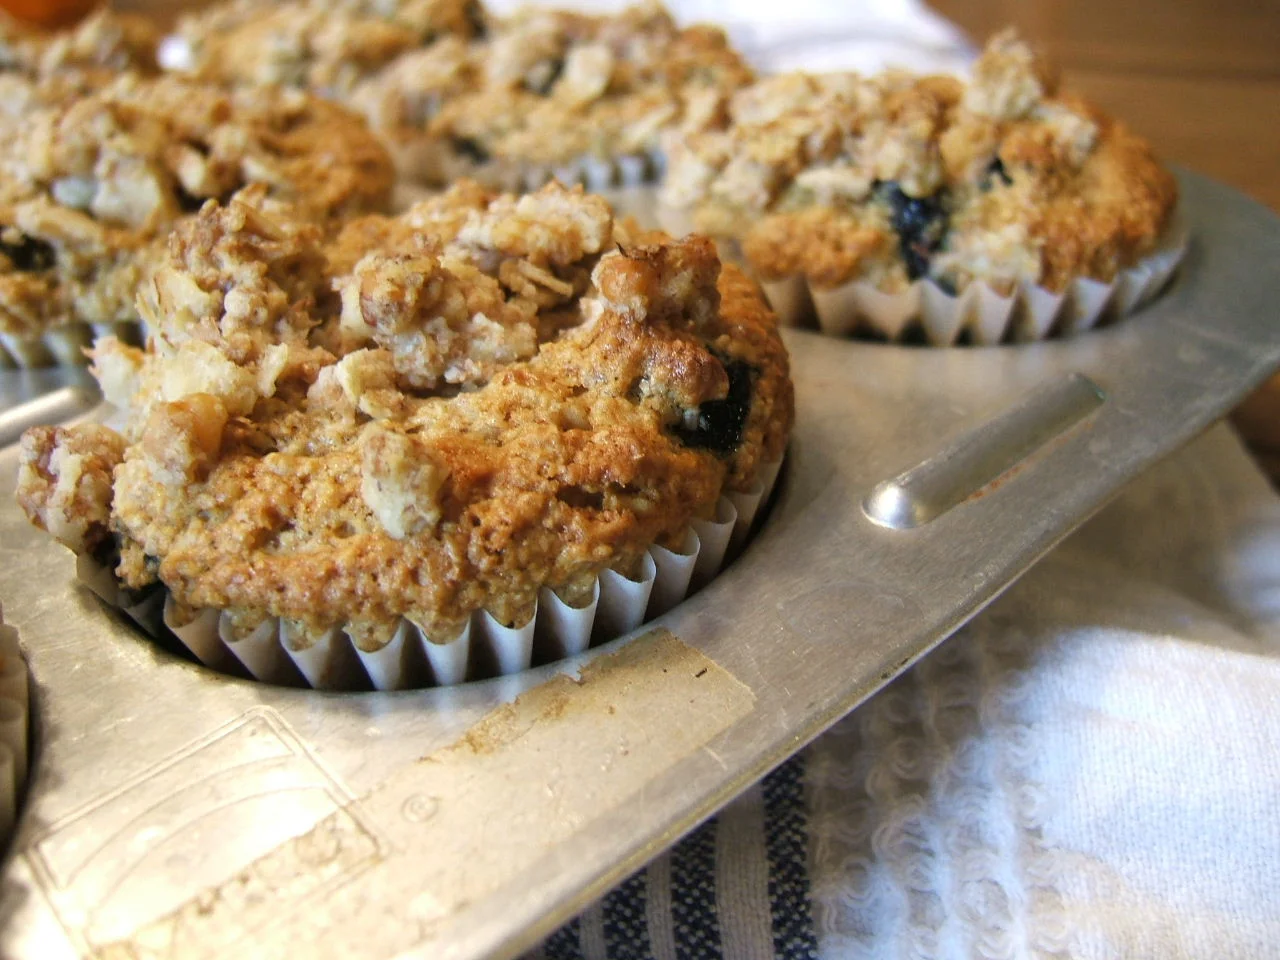 Blueberry oatmeal walnut muffins in a baking tray.